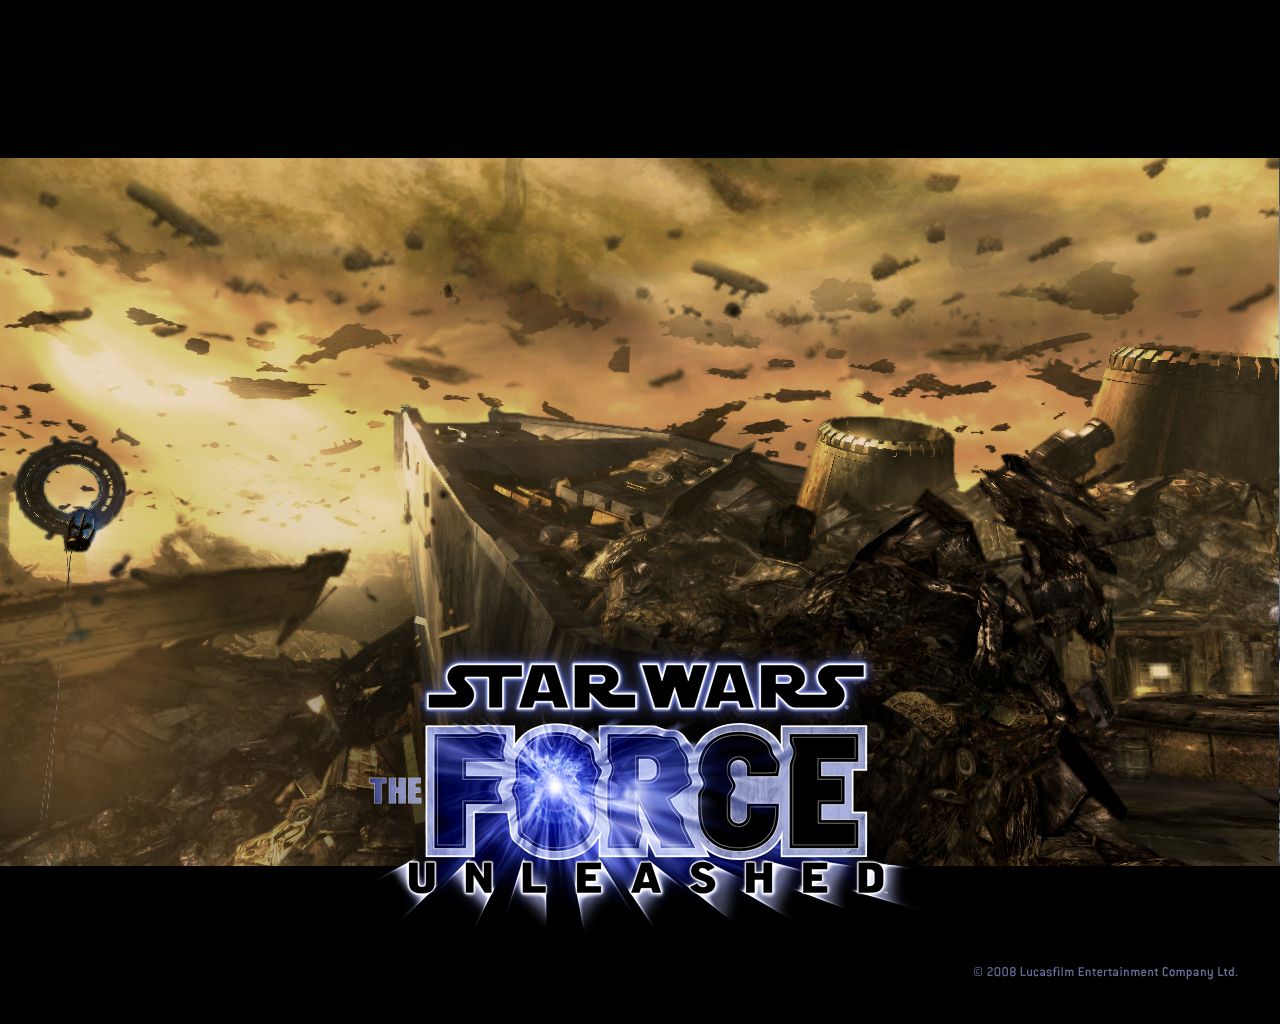 Star Wars The Force Unleashed image Wallpapers - HD Wallpapers 73509